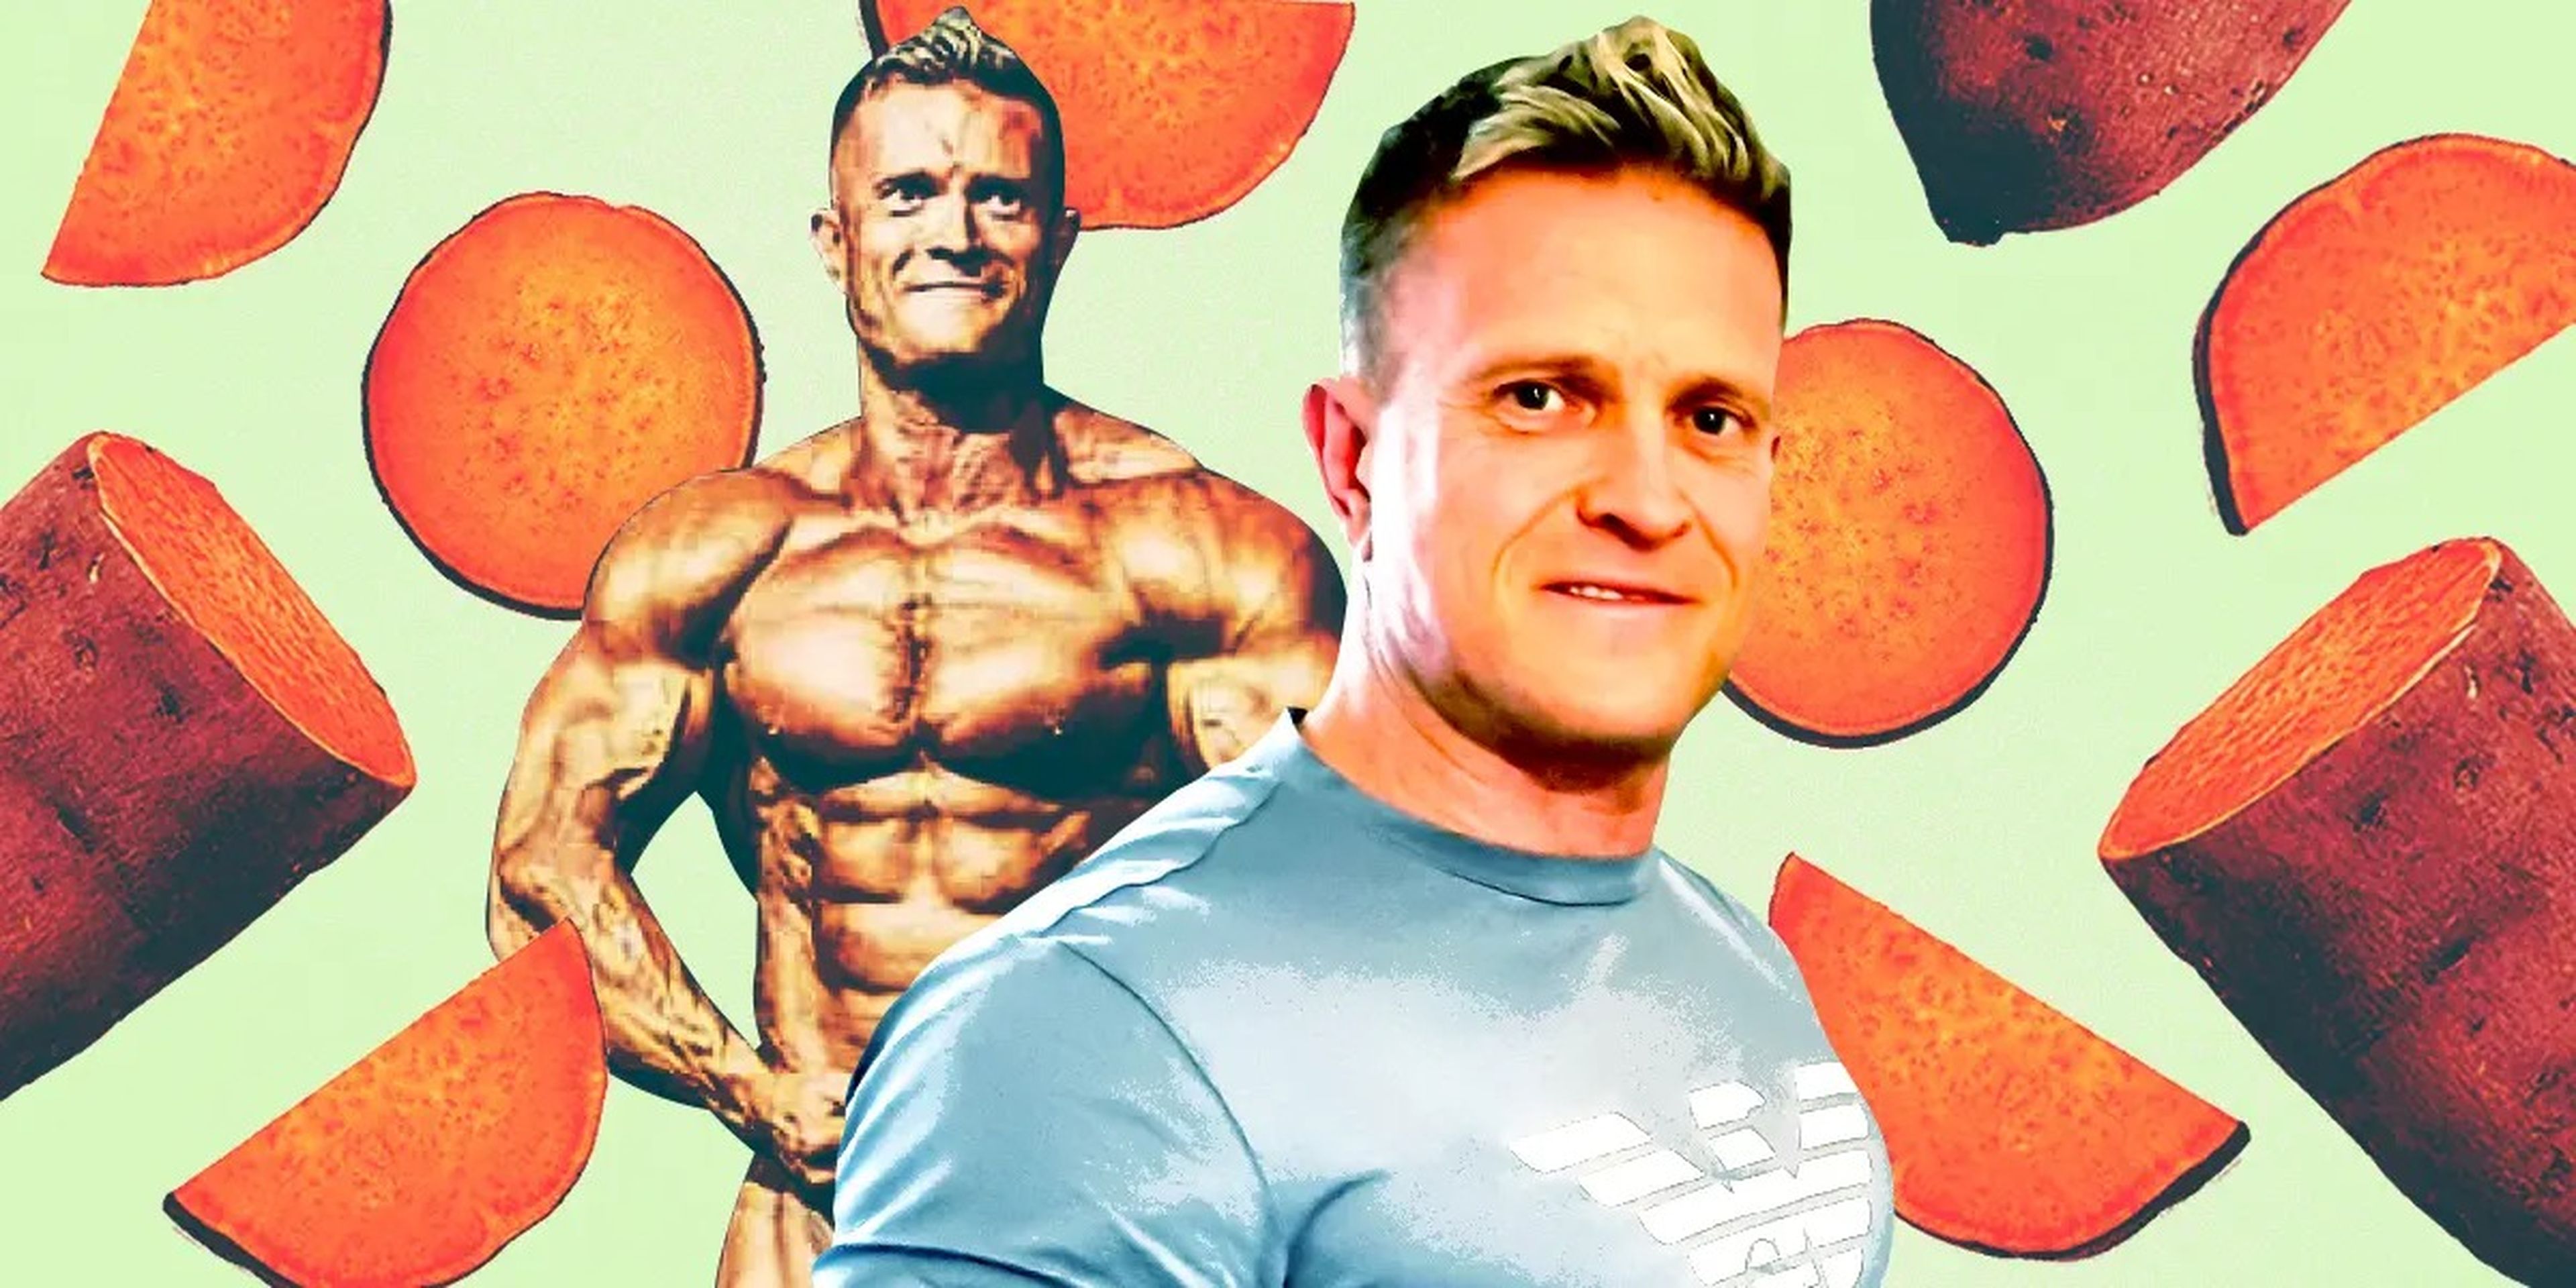 Bodybuilder Mark Taylor surrounded by a variety of sweet potatoes